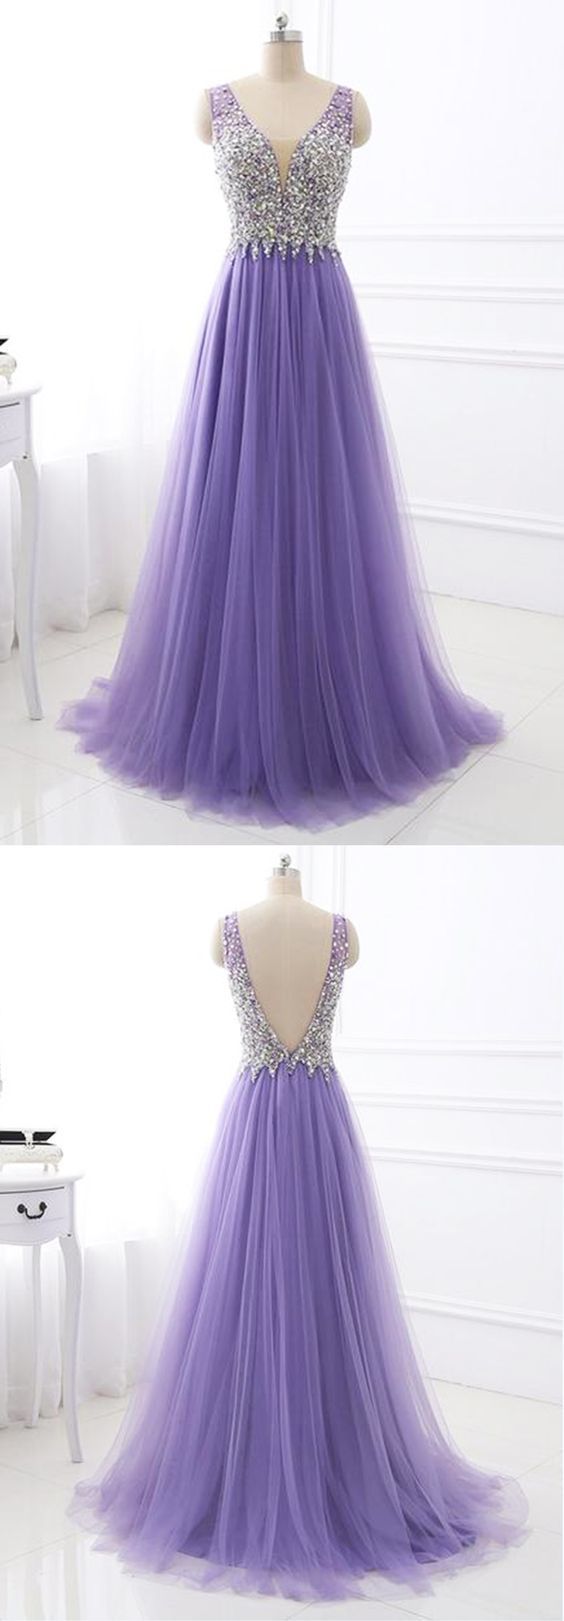 Lavender Tulle A-line Prom Dress Long Formal Dress for Wedding GDC1250-Dolly Gown